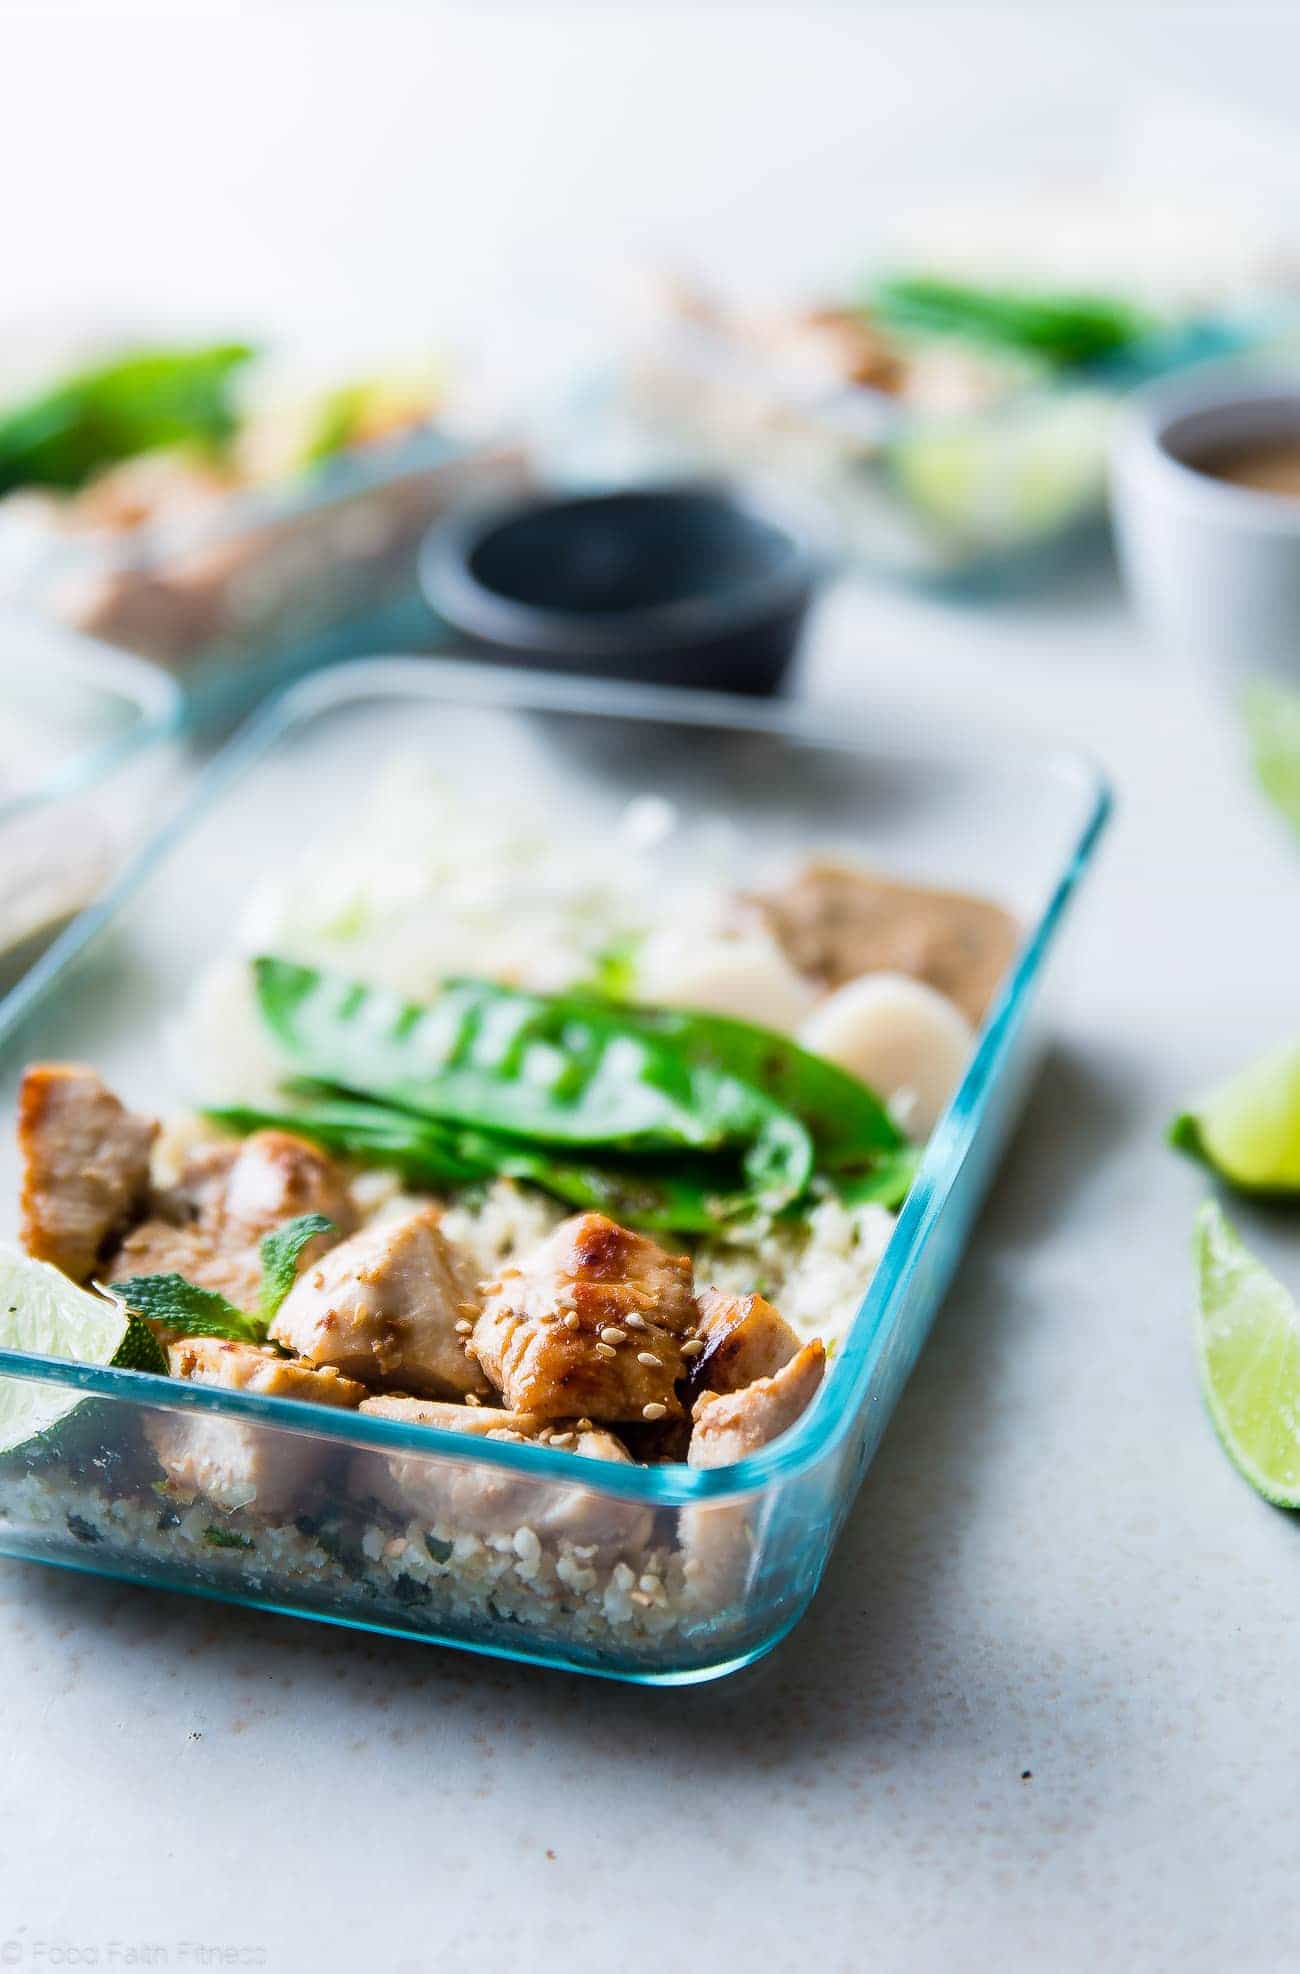 Chicken Satay Meal Prep Bowls - These meal prep bowls are a healthy, gluten free make-ahead meal that's perfect for work days! They're protein packed and lower carb to keep you full! | Foodfaithfitness.com | @FoodFaithFit